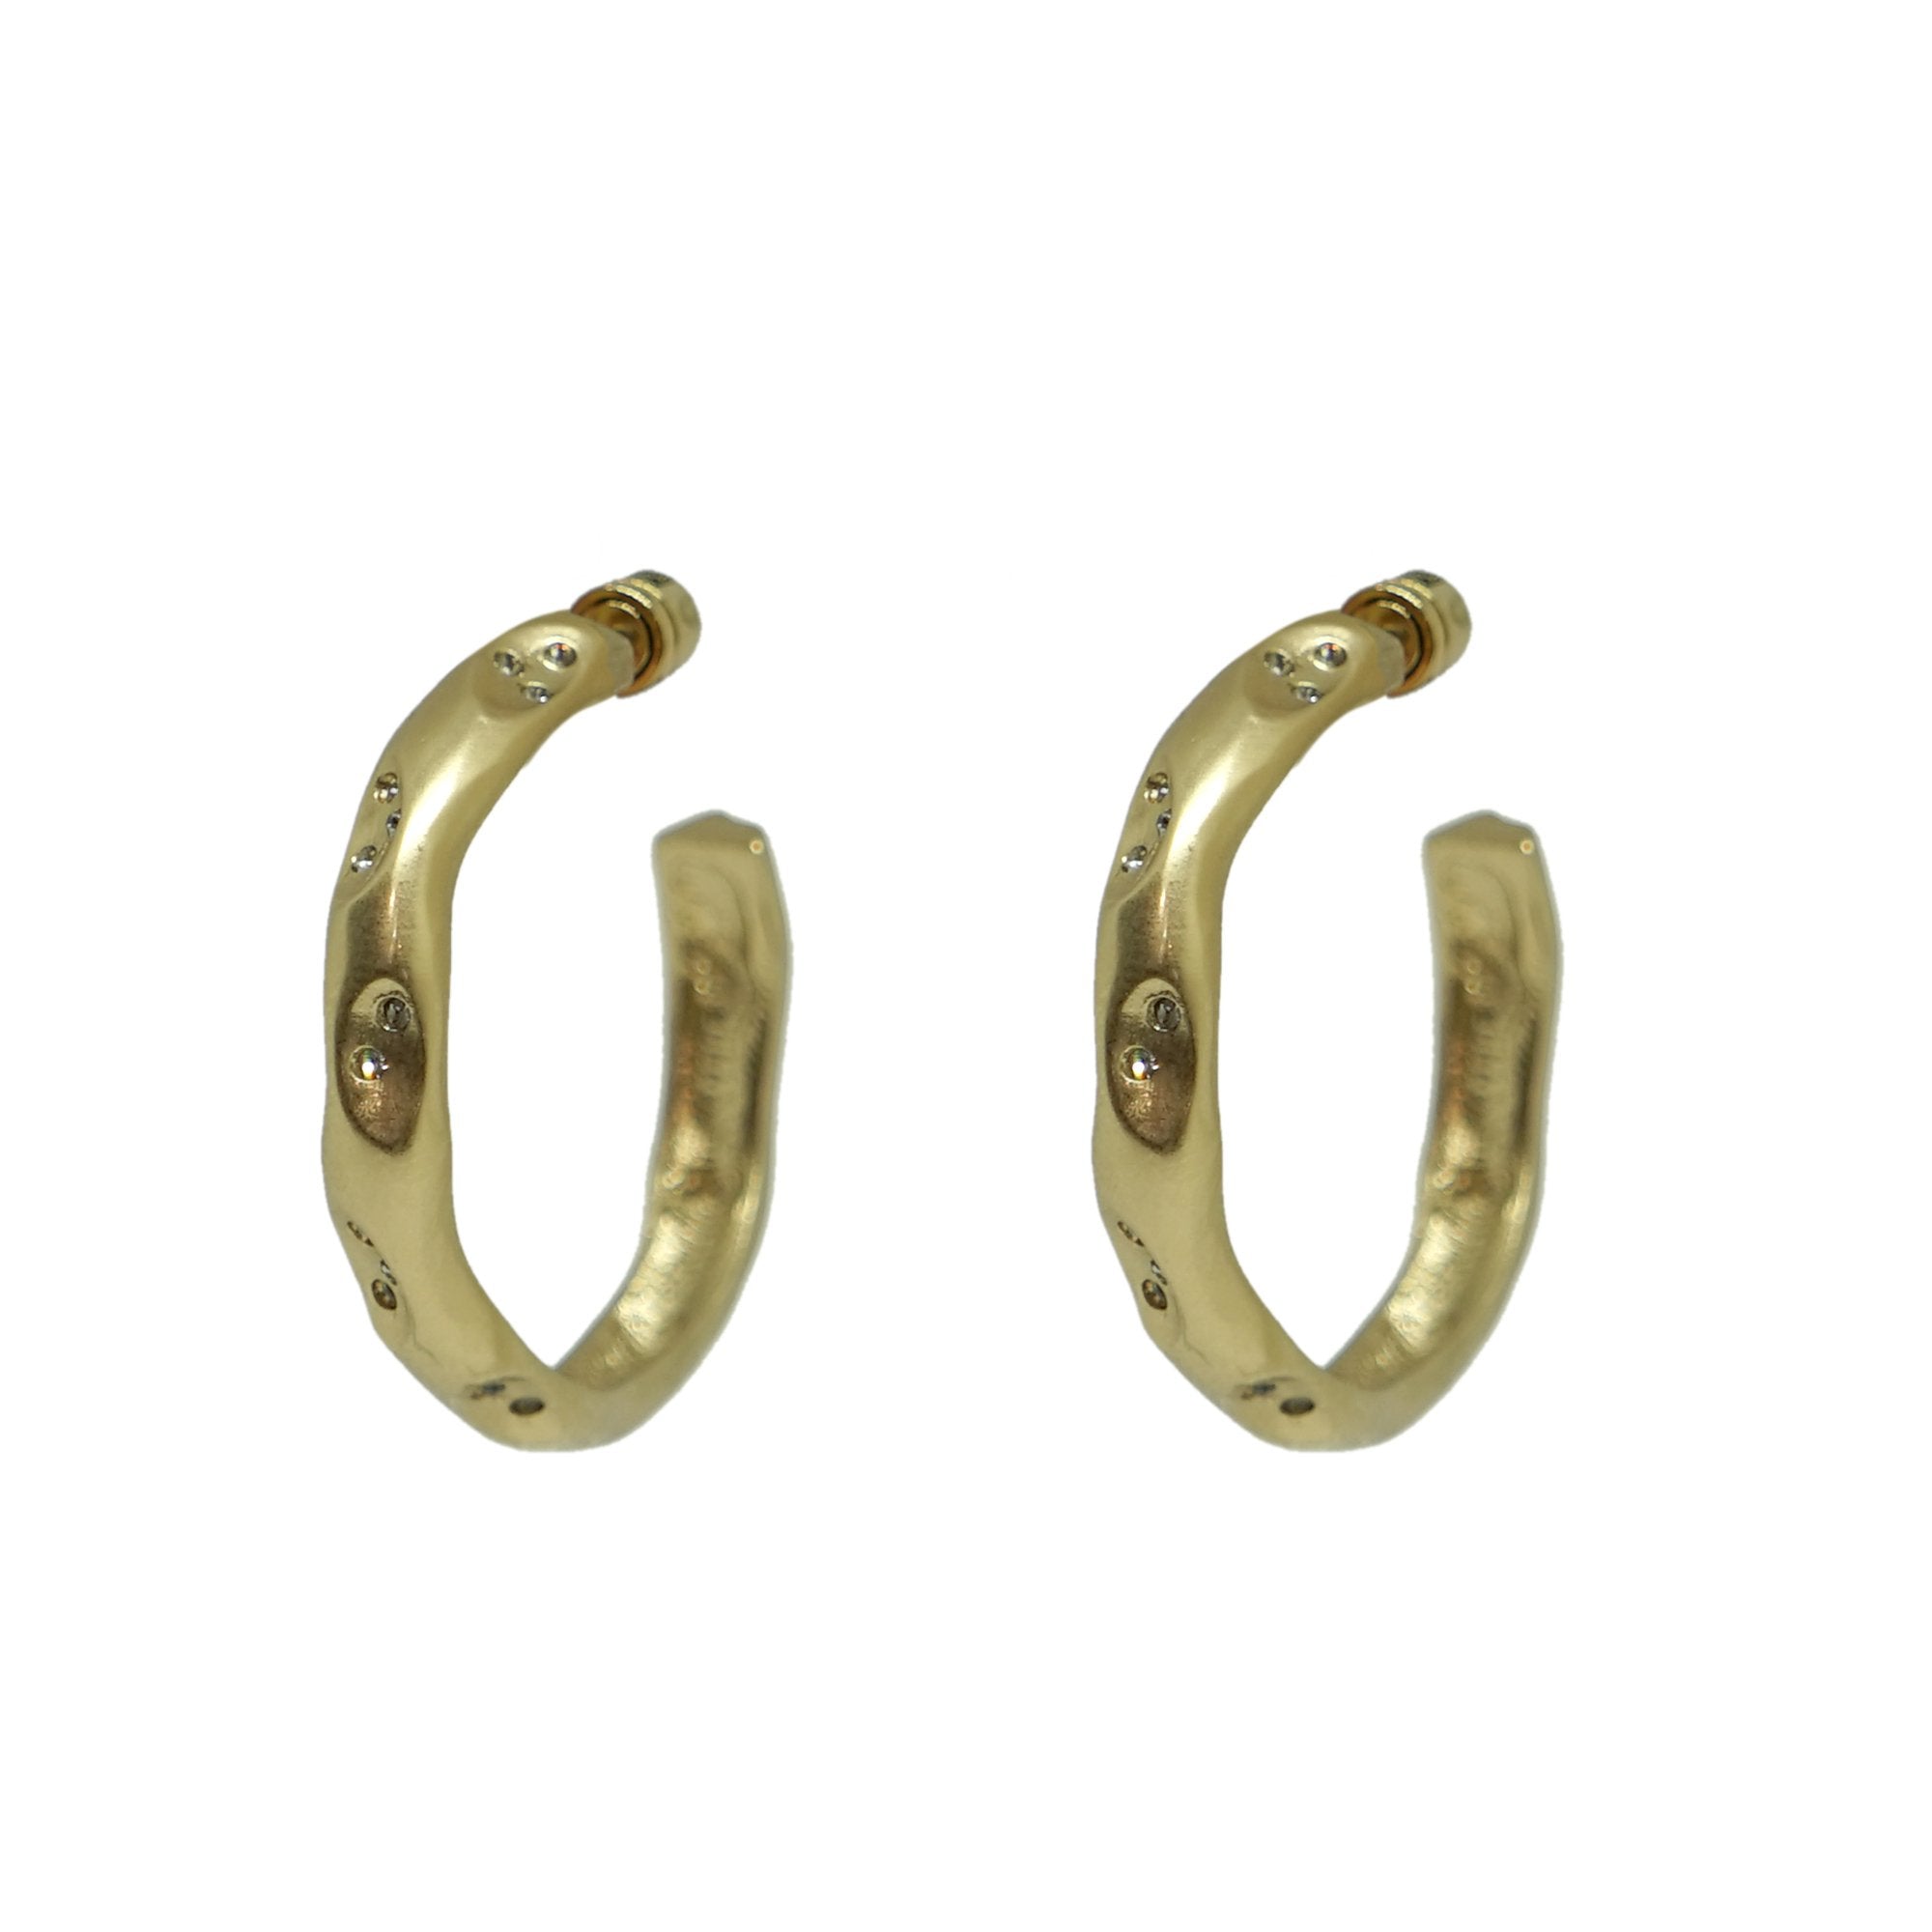 Gold Thin 1.5" Impression Hoops